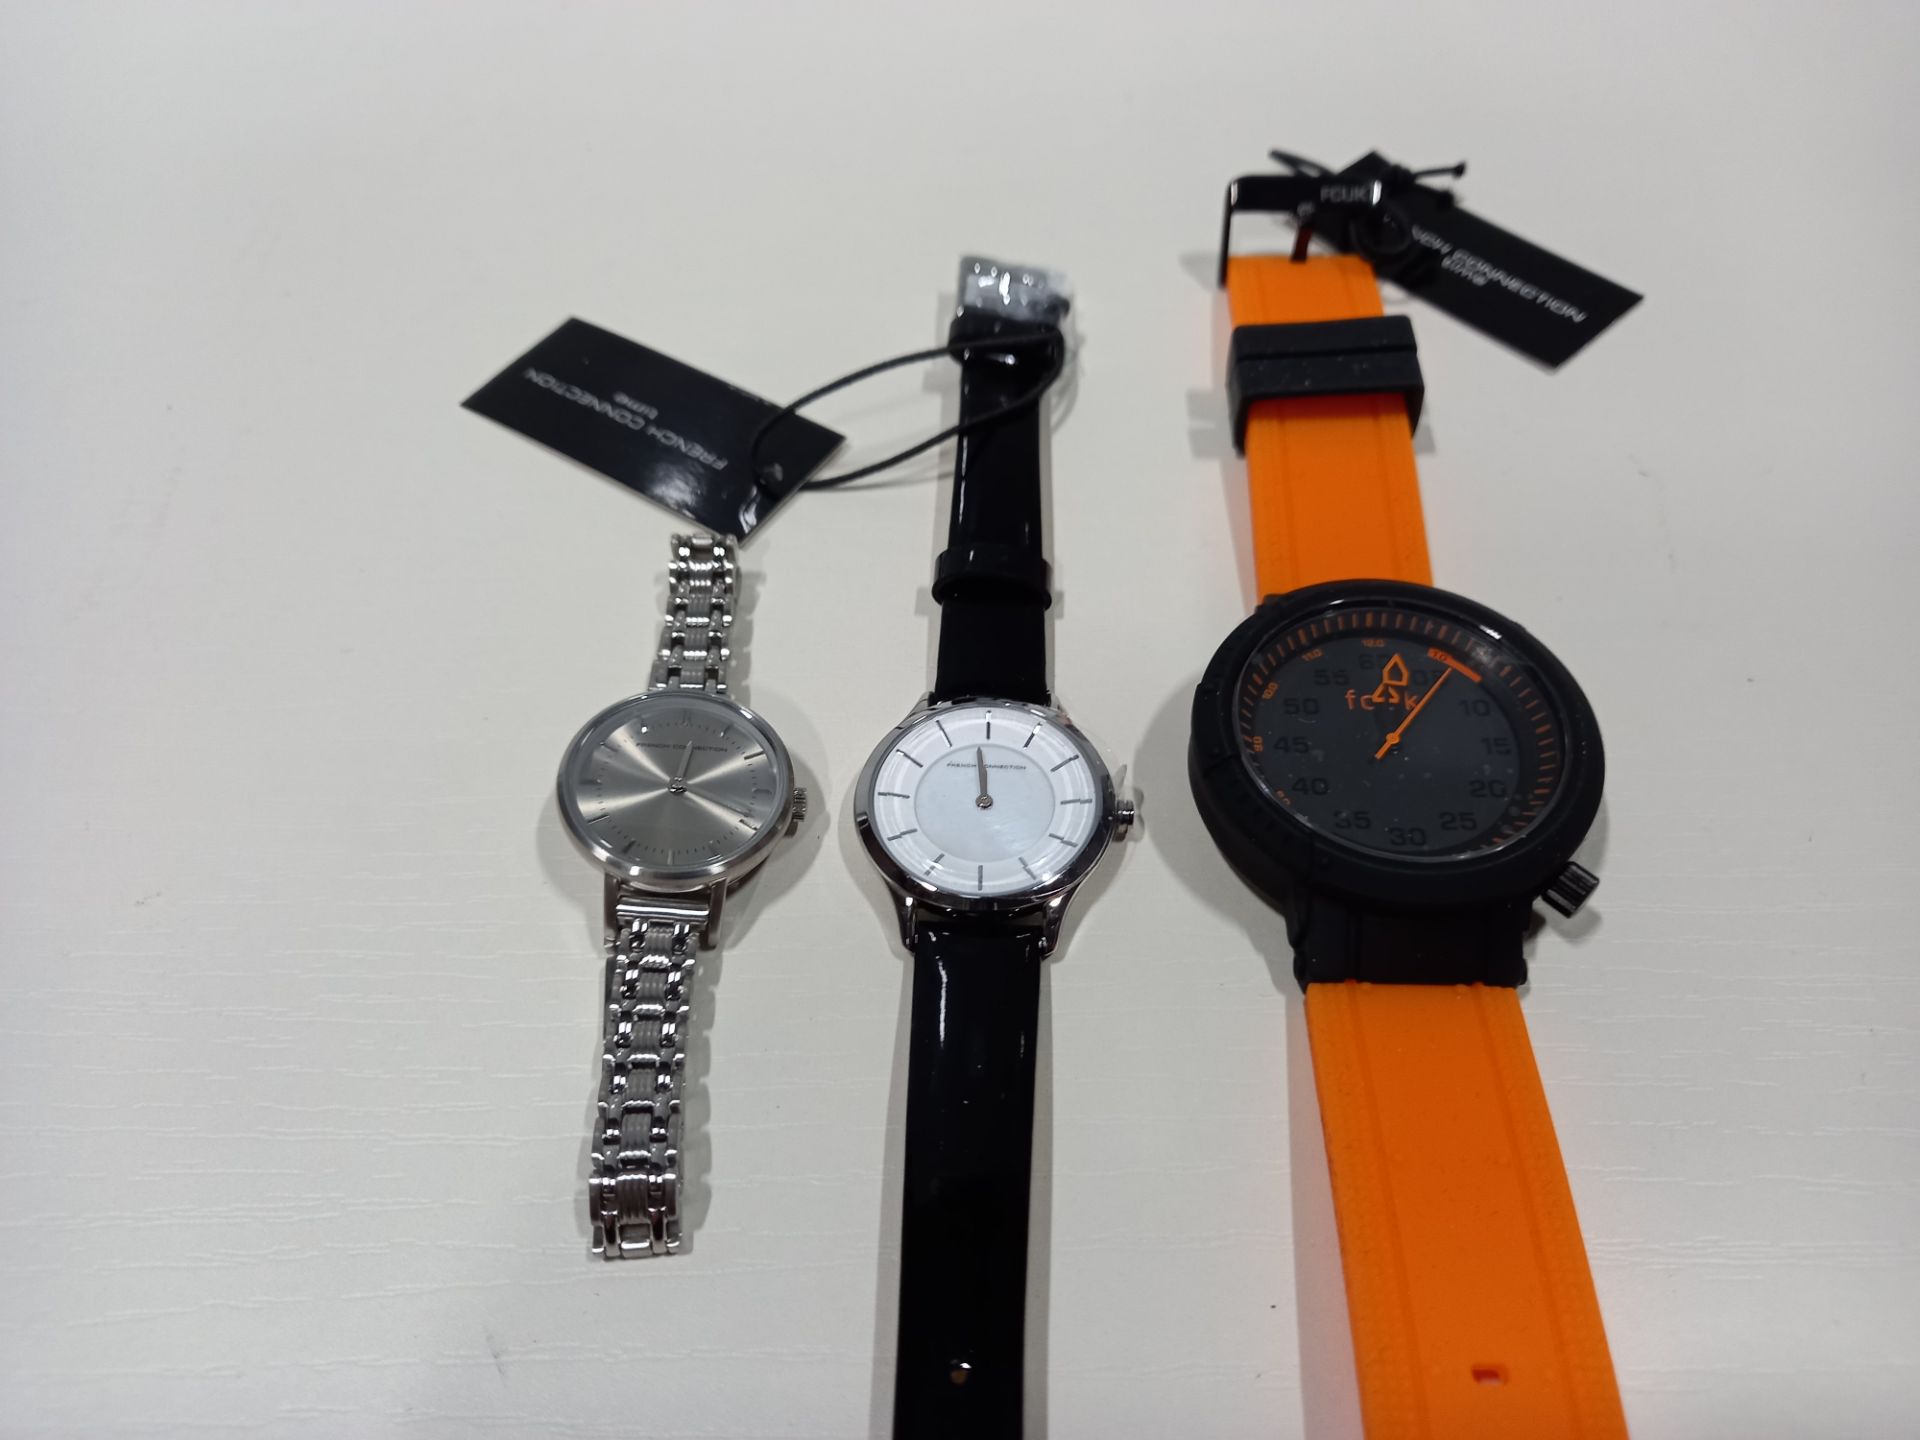 3 X BRAND NEW FRENCH CONNECTION WATCHES - CODES FC1230UGM, FC1171B, FC1236SM